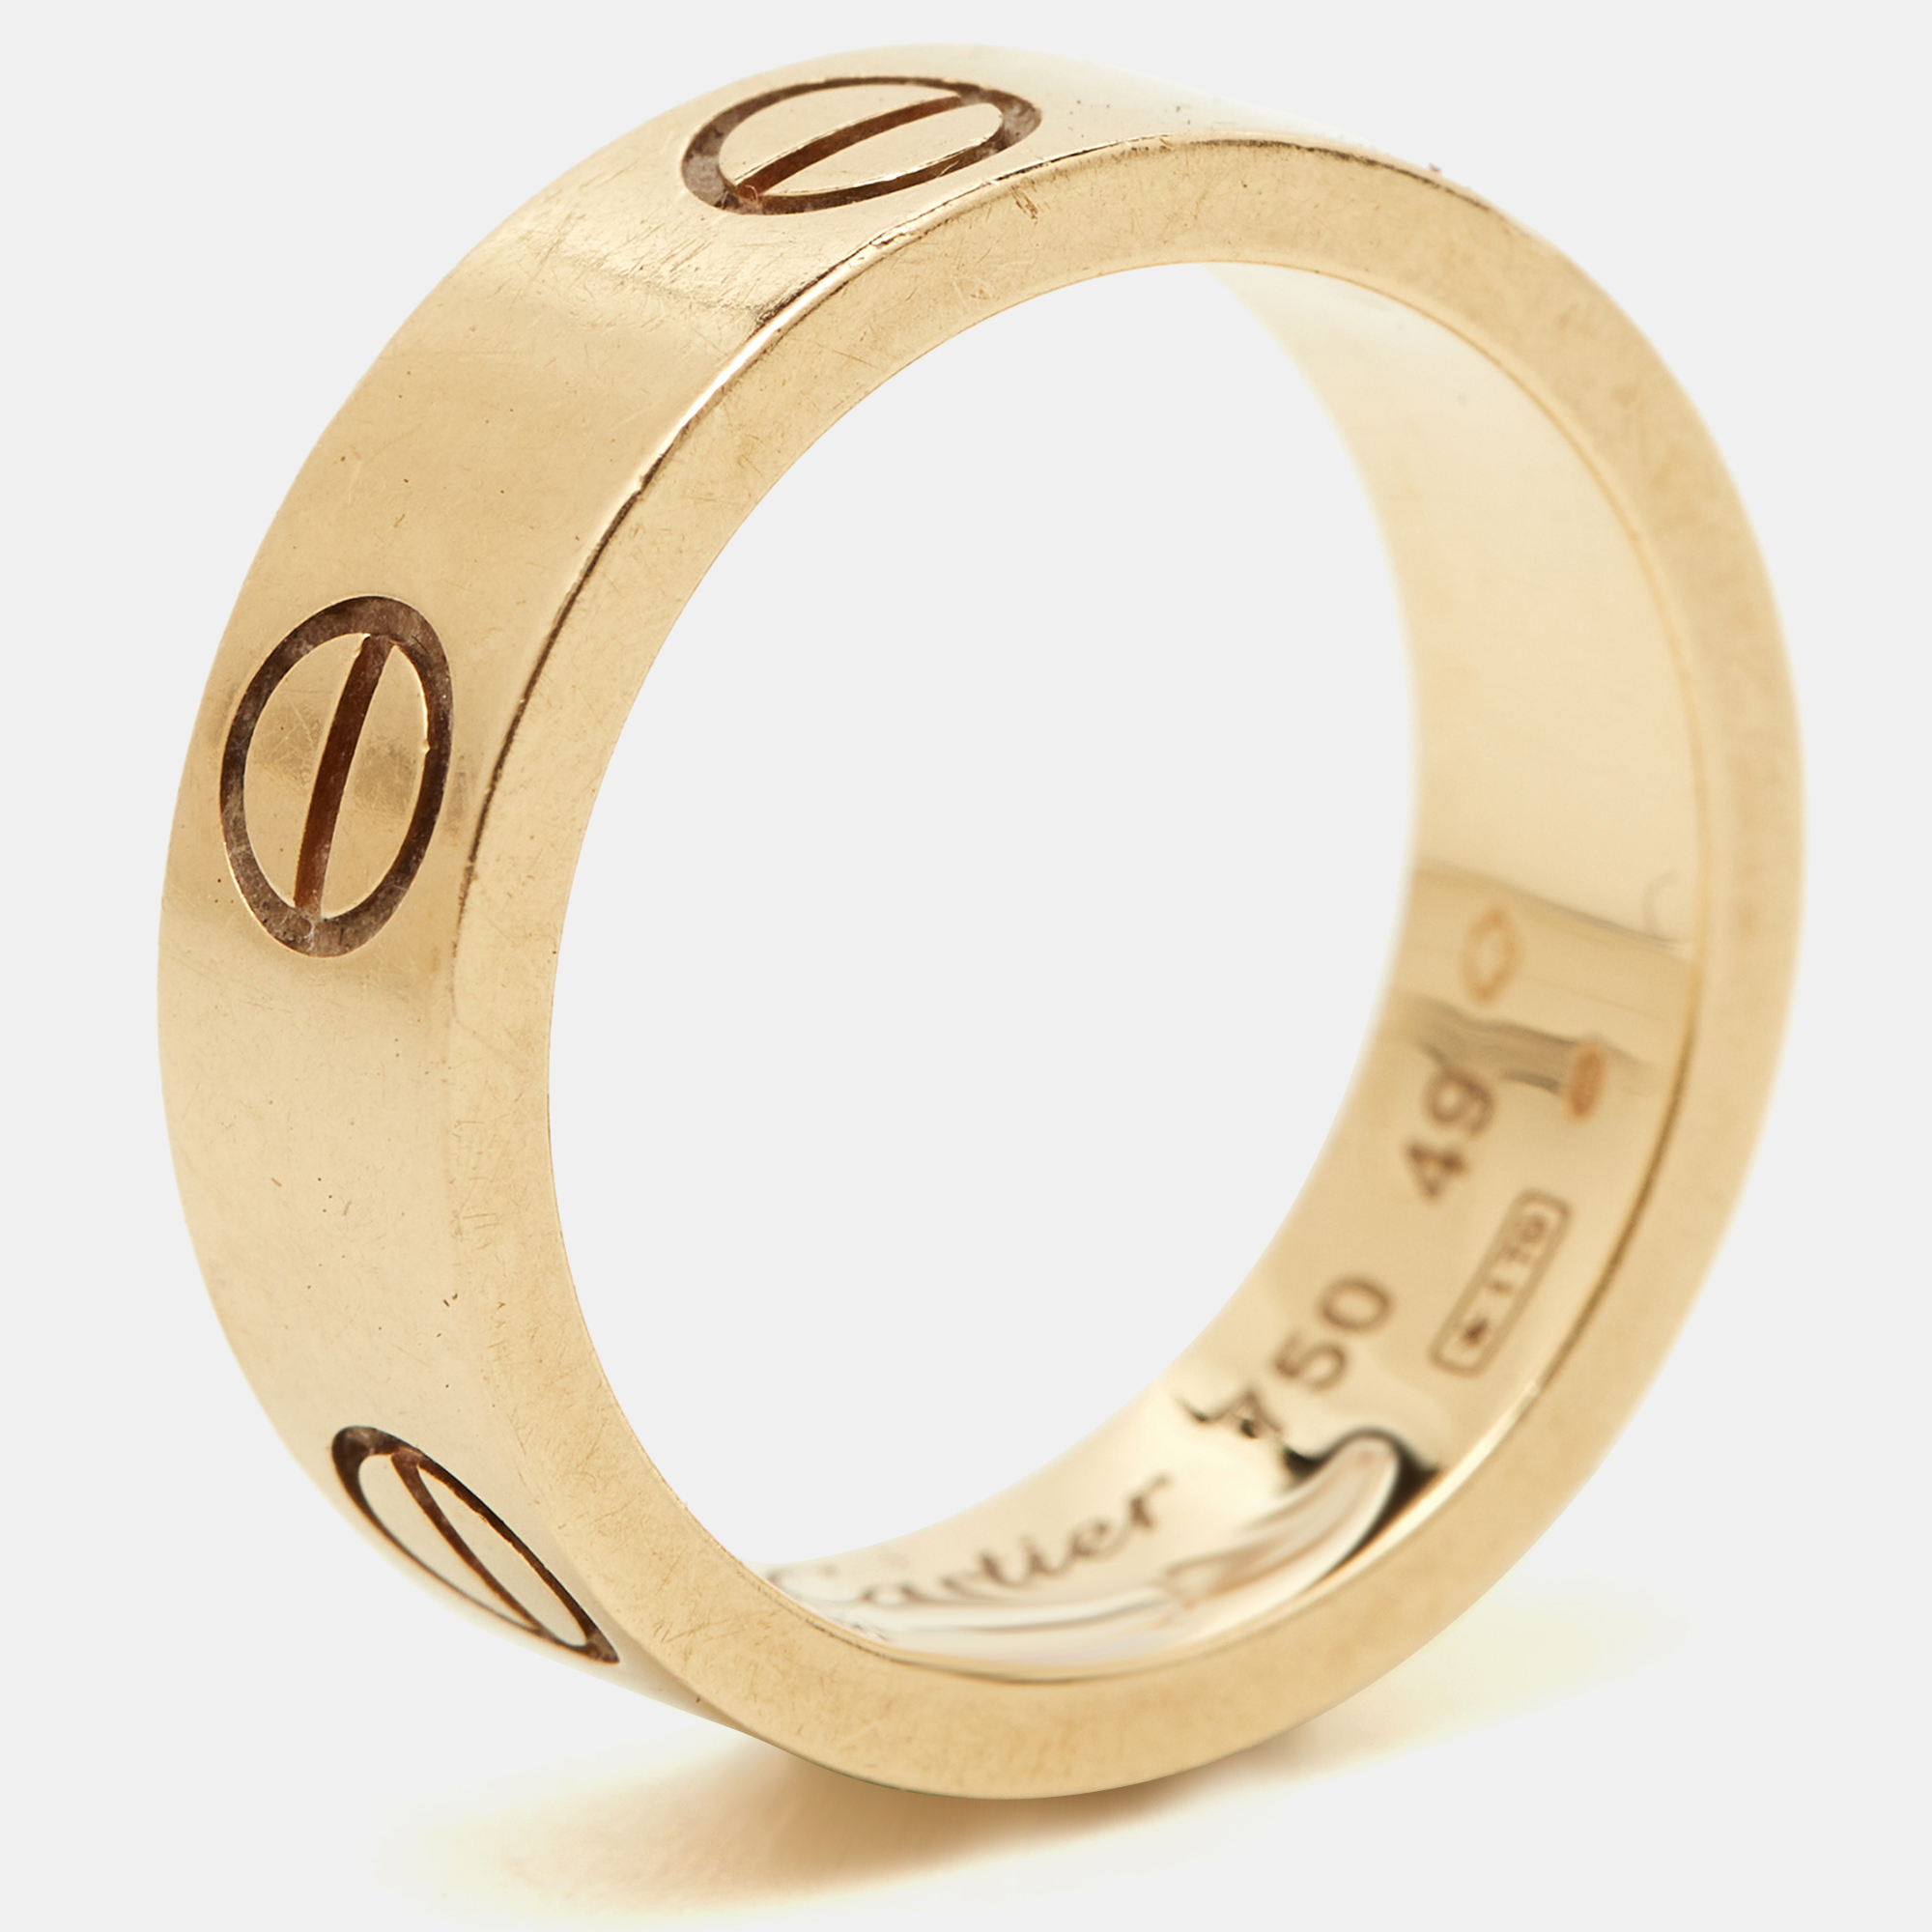 This stunning Love ring is an icon of style and luxury. Constructed in 18k yellow gold this ring features screw details all around the surface as symbols of a sealed and secured bond. This ring is sure to become your everyday essential.